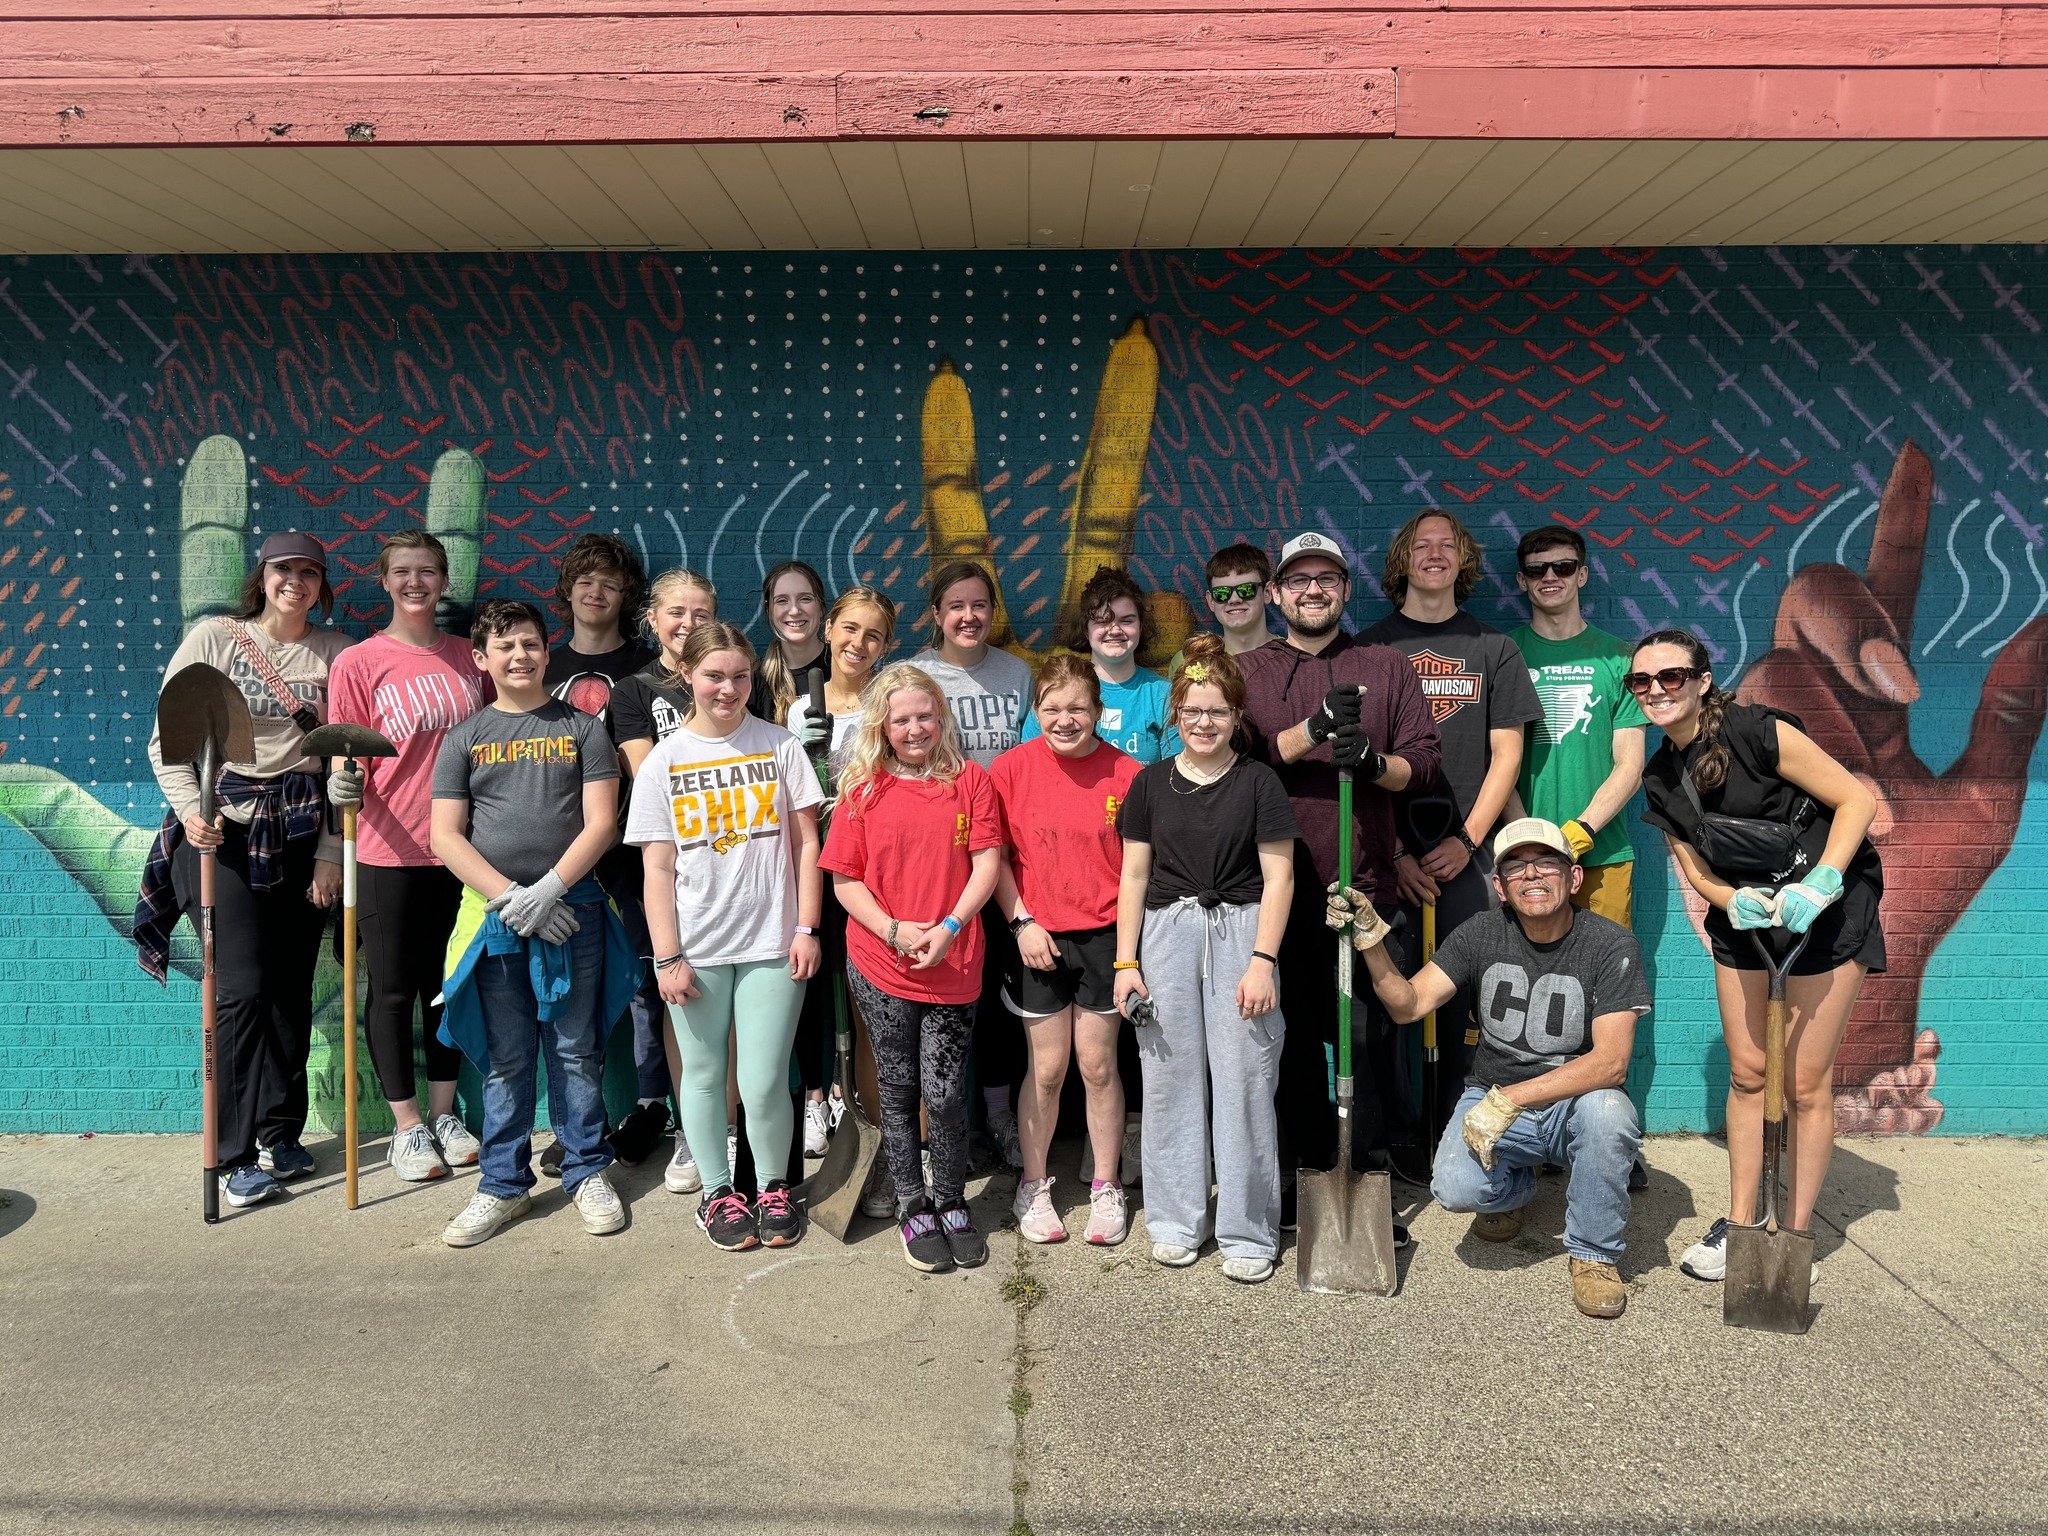 WE DID IT. 💪 On Saturday, neighbors from Eastcore and Montello Park came together for our annual neighborhood cleanups. They beautified our community and demonstrated what's possible when we work together. 🏡 Thank you to everyone who contributed to